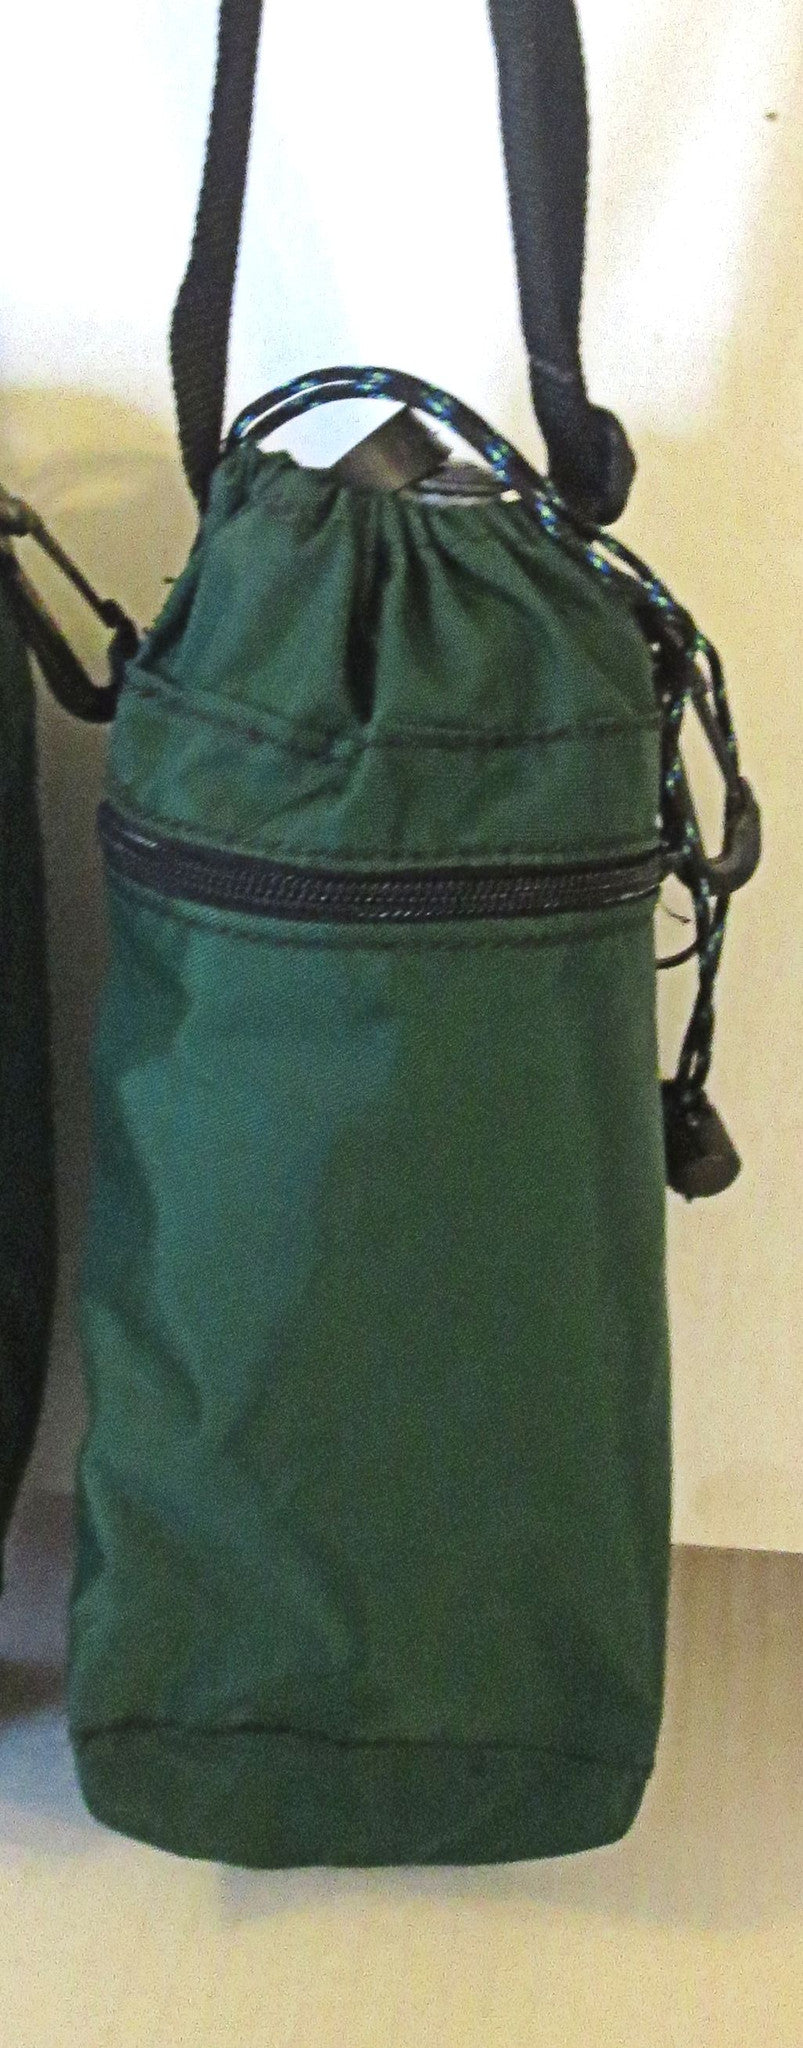 water bottle bag adjustable sling styling great for travel, on the go, staying hydrated dark green / outer zippered pocket